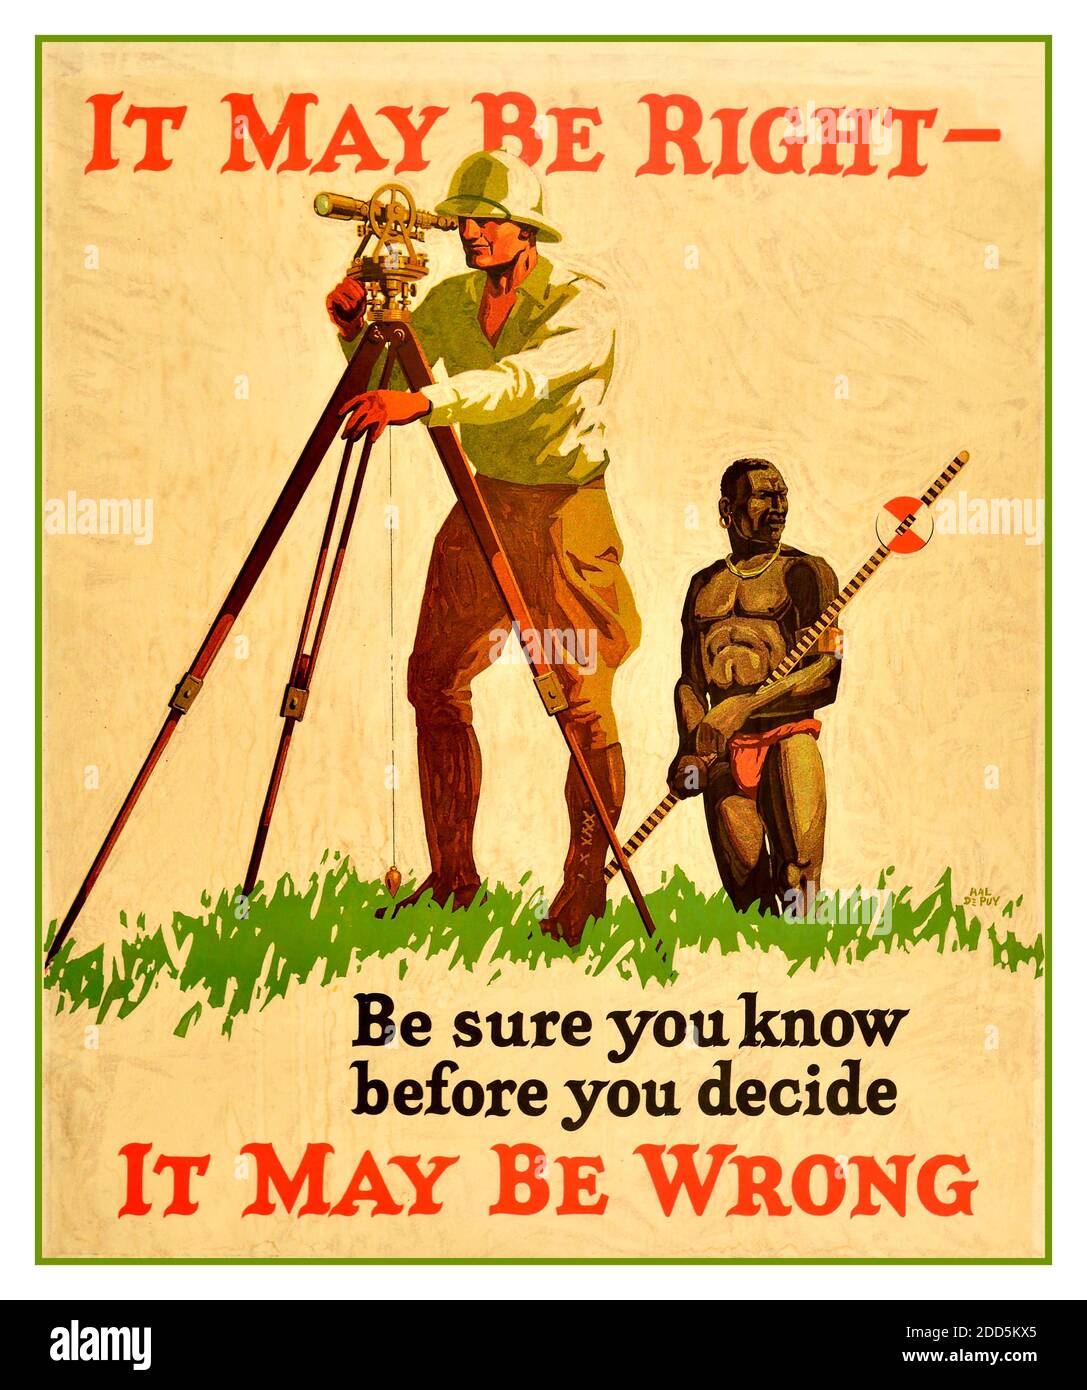 Vintage 1920's propaganda poster titled 'It May Be Right, It May Be Wrong - Be sure you know before you decide', with an artwork of a man surveying with a theodolite on a tripod, accompanied by another man with a measuring staff. Printed in Chicago between 1923 and 1929, the Mather Work Incentive Posters were designed to improve worker productivity and curb turnover during a time of economic expansion and plentiful jobs. Many of Mather's artists were heavily influenced by the 'Plakatstil,' or Poster Style, made famous in Germany by Lucian Bernhard and Ludwig Hohlwein. Stock Photo